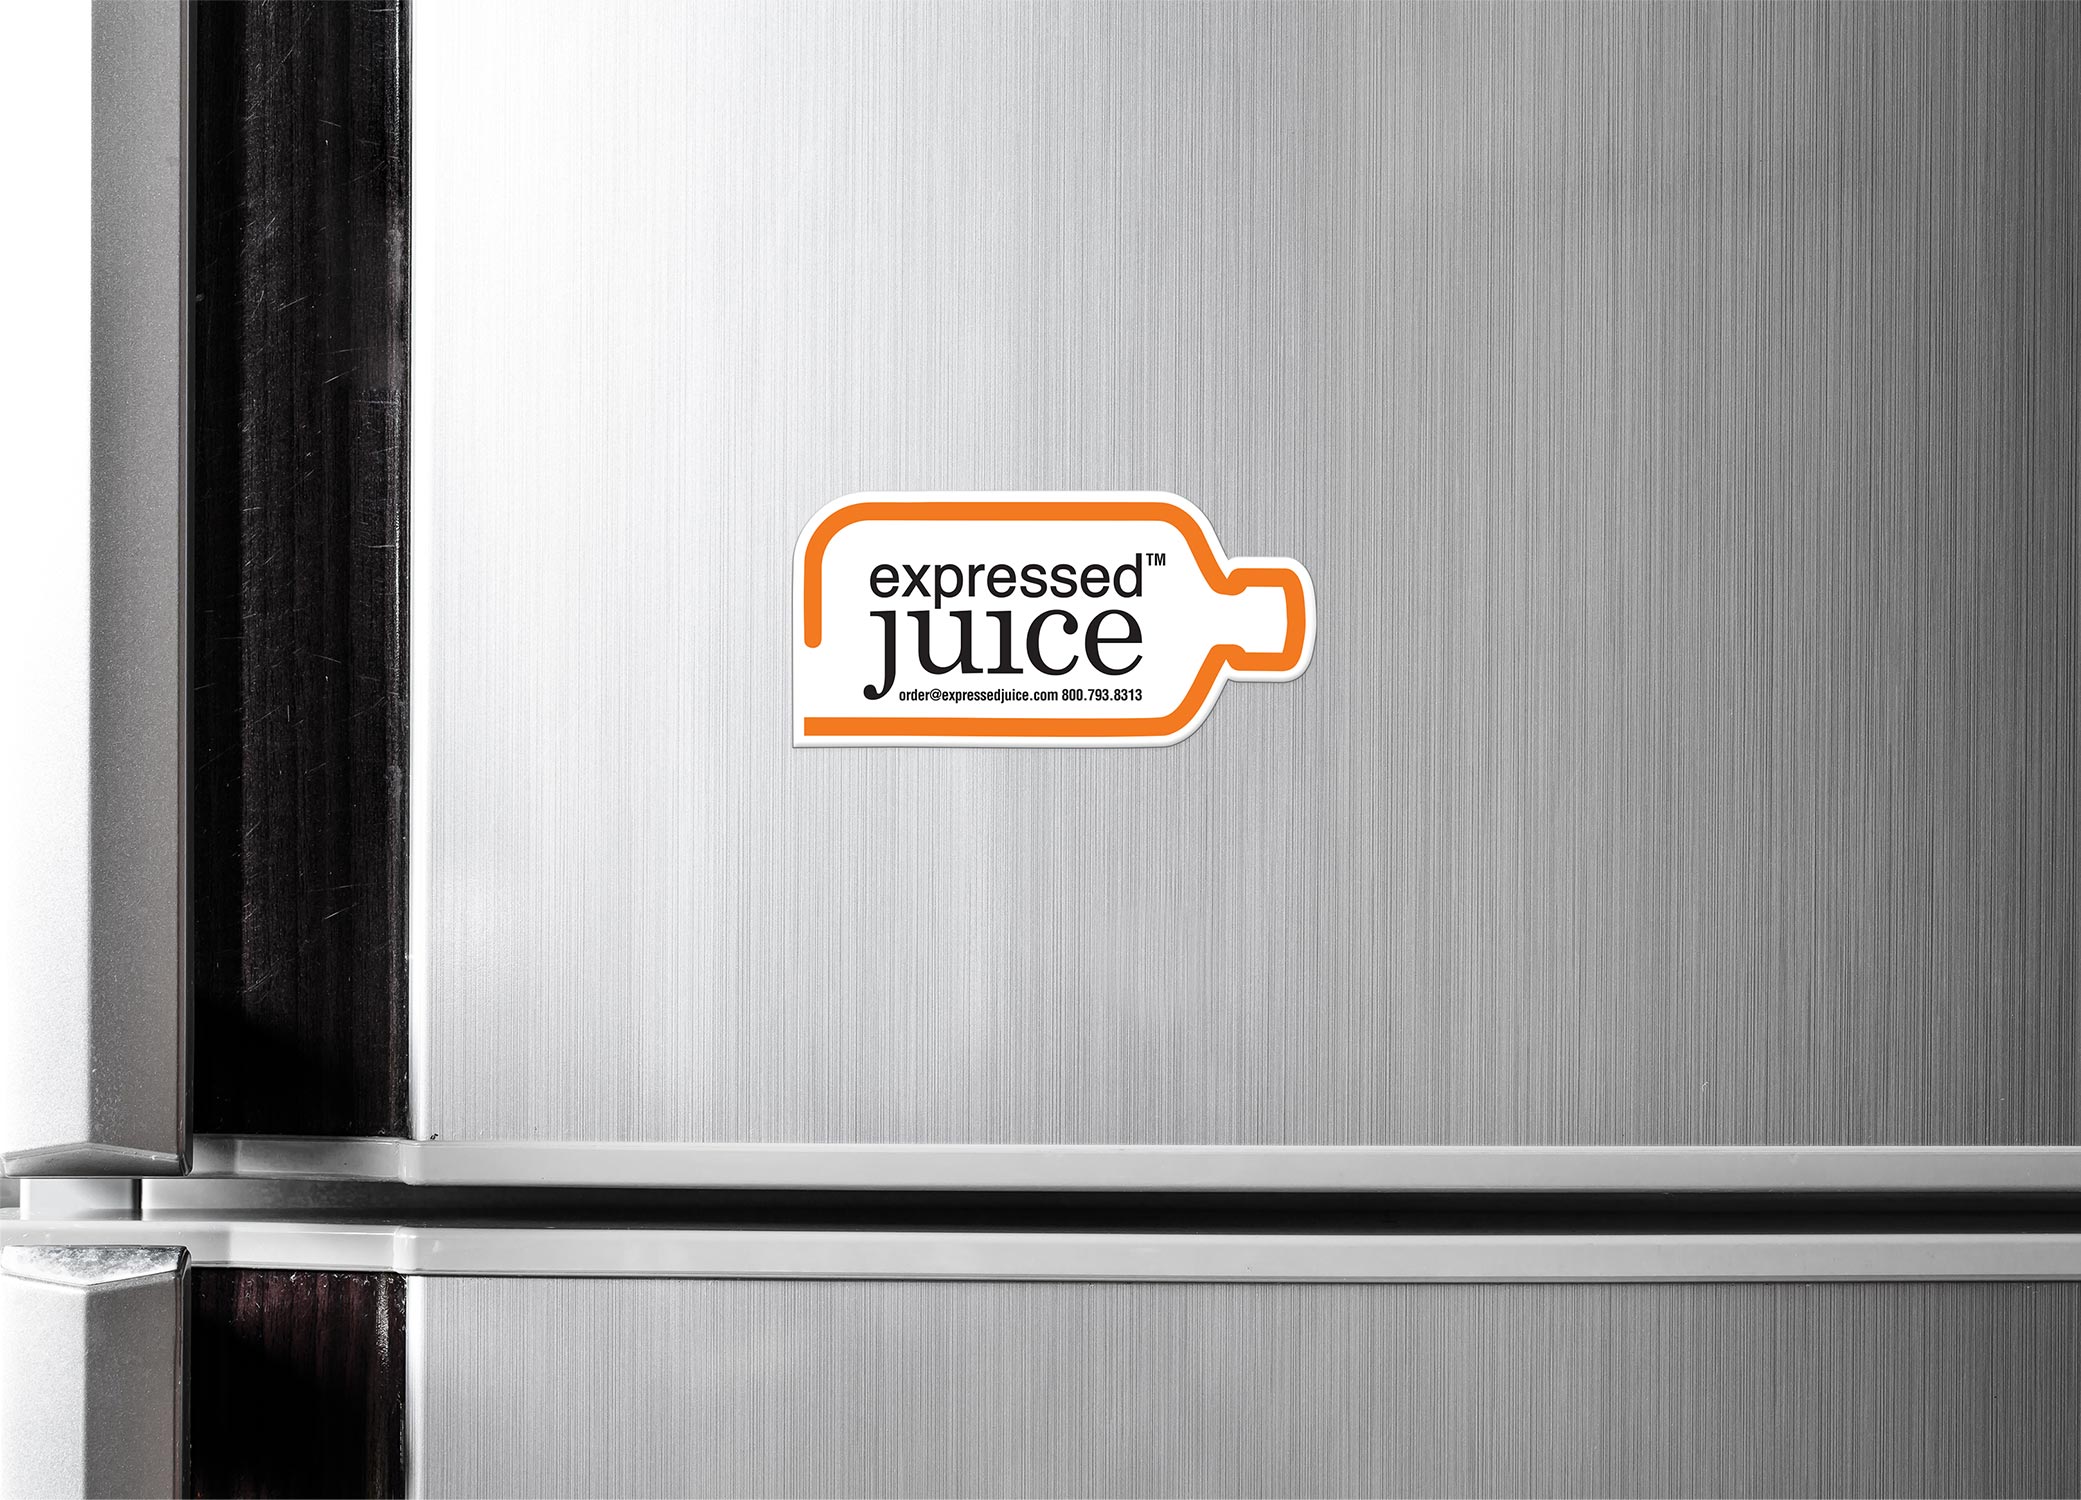 Expressed Juice magnet displayed on stainless steel refrigerator with logo and orange outline of a bottle shape.